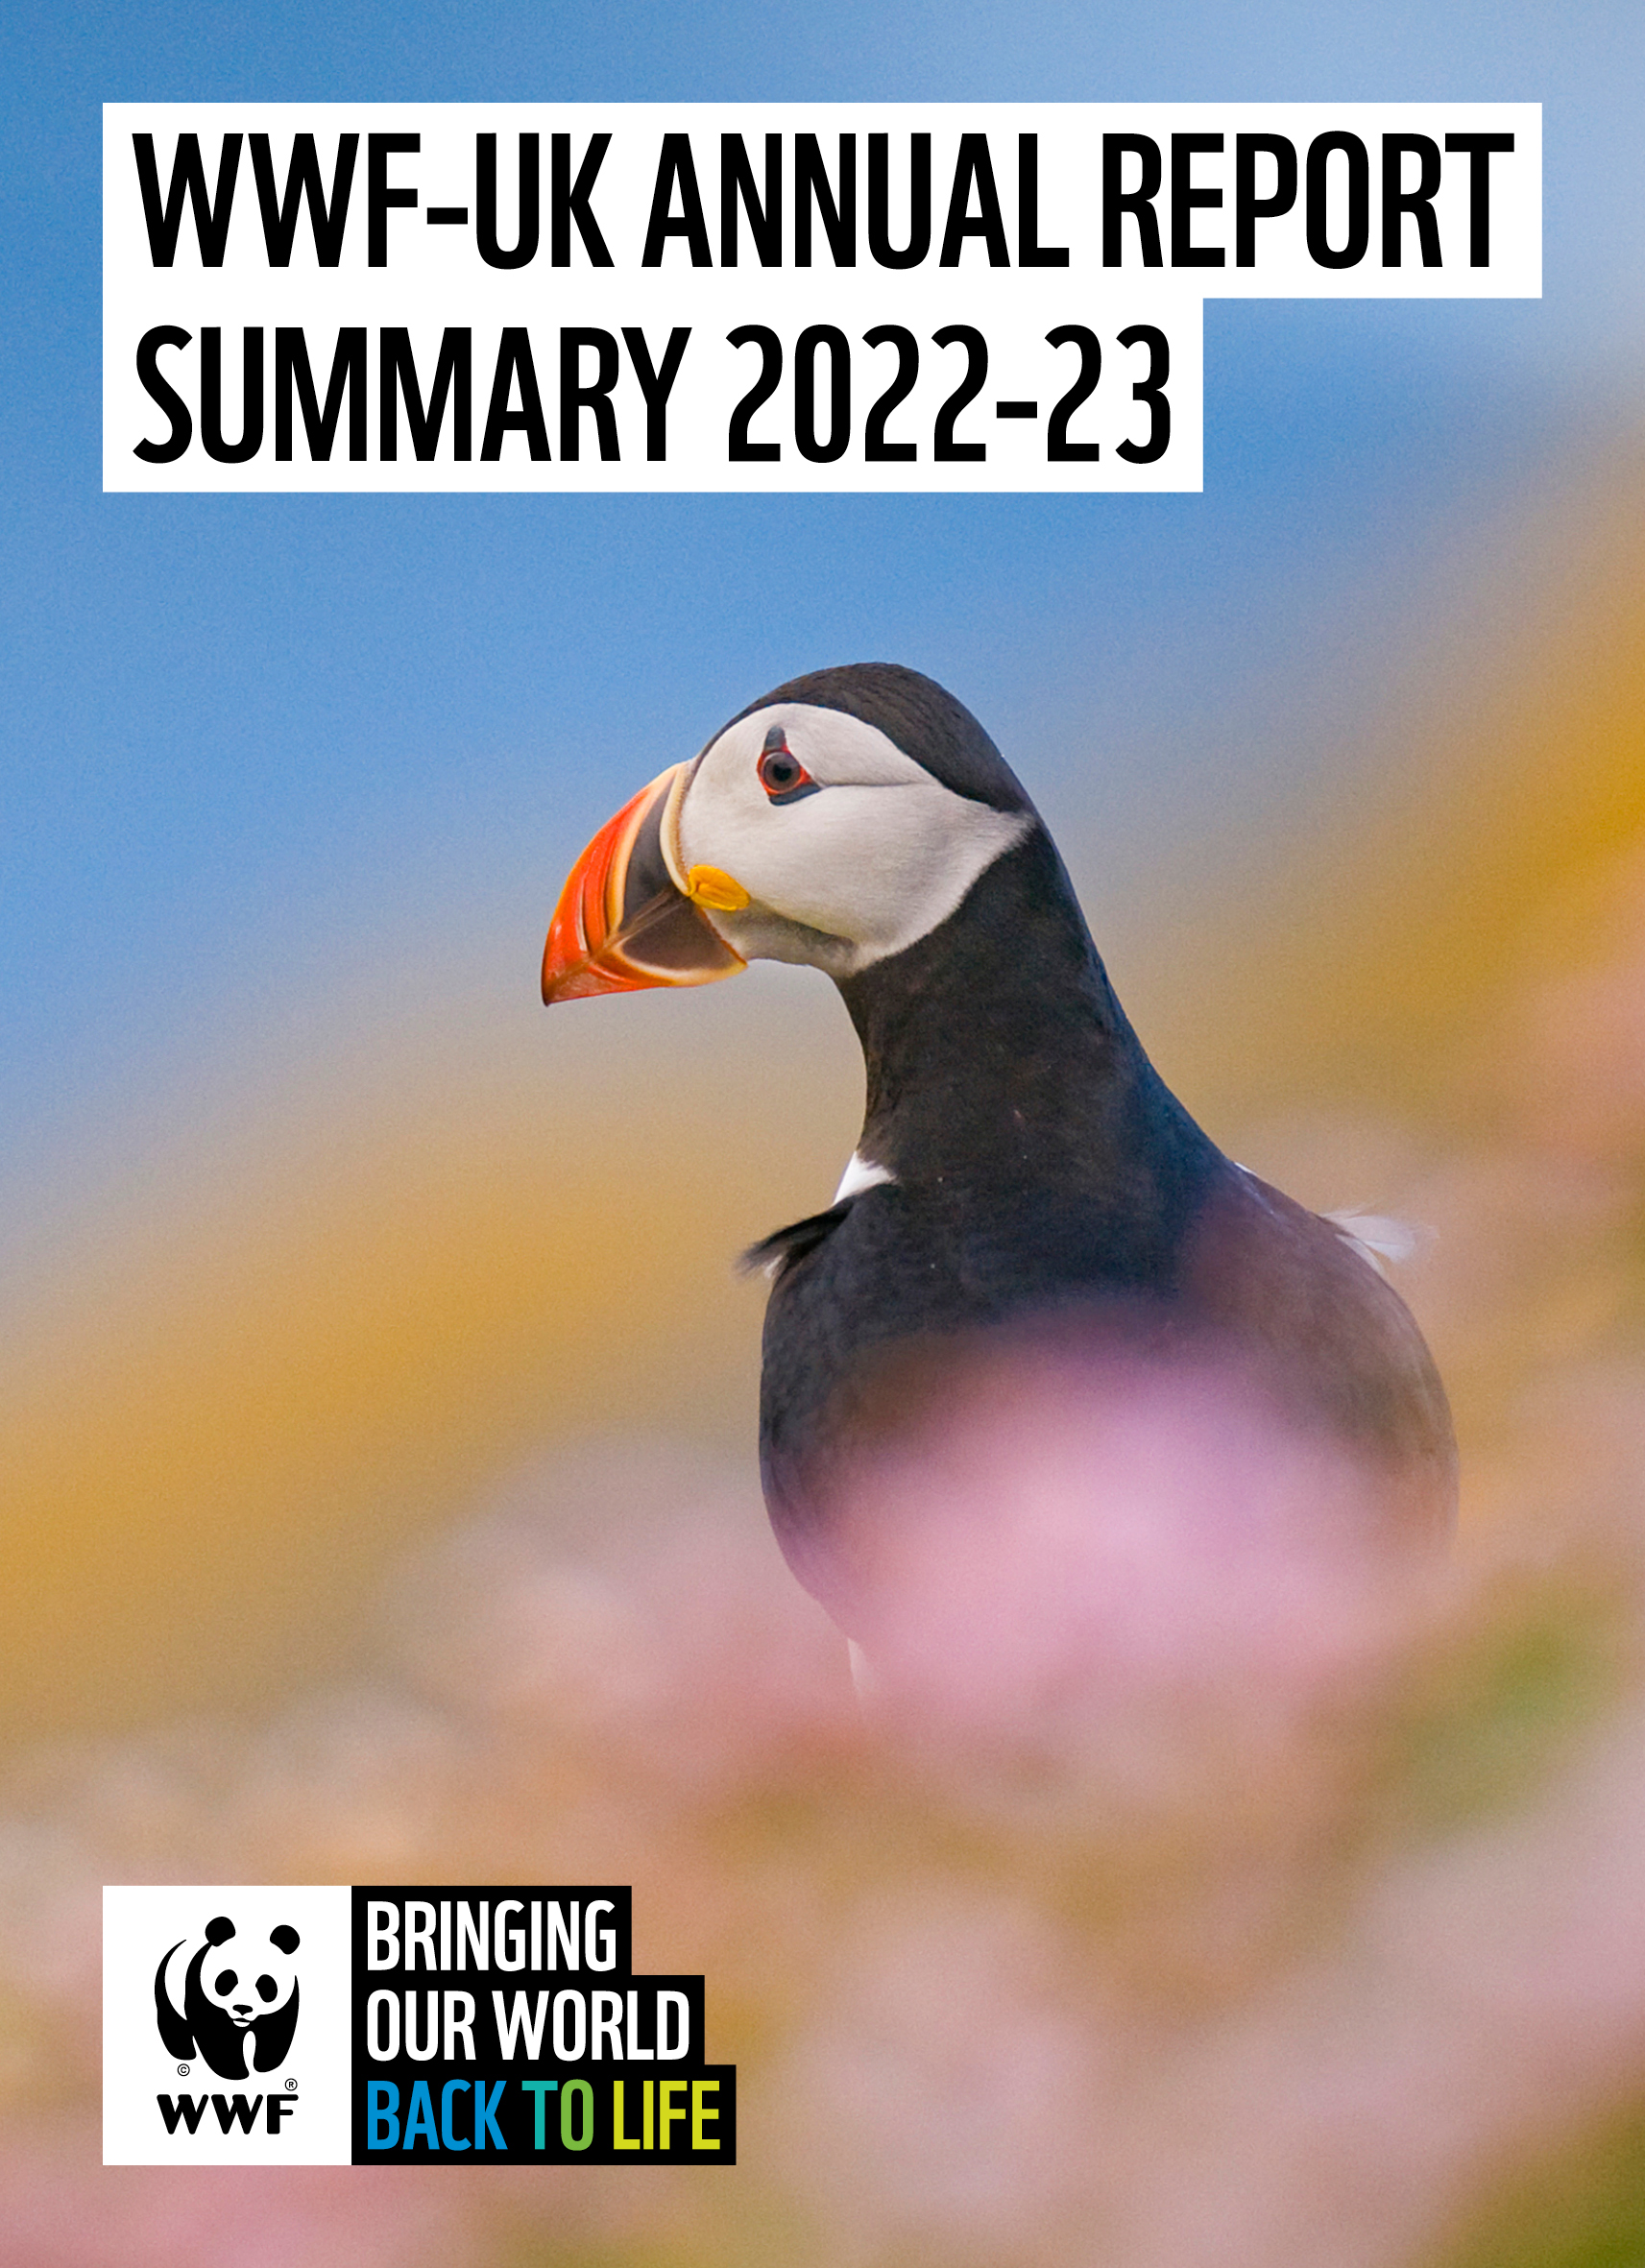 An Atlantic puffin among purple thrift and yellow lichens, Shetland, Scotland. With the text 'WWF-UK Annual Report Summary 2022-23' and WWF logo